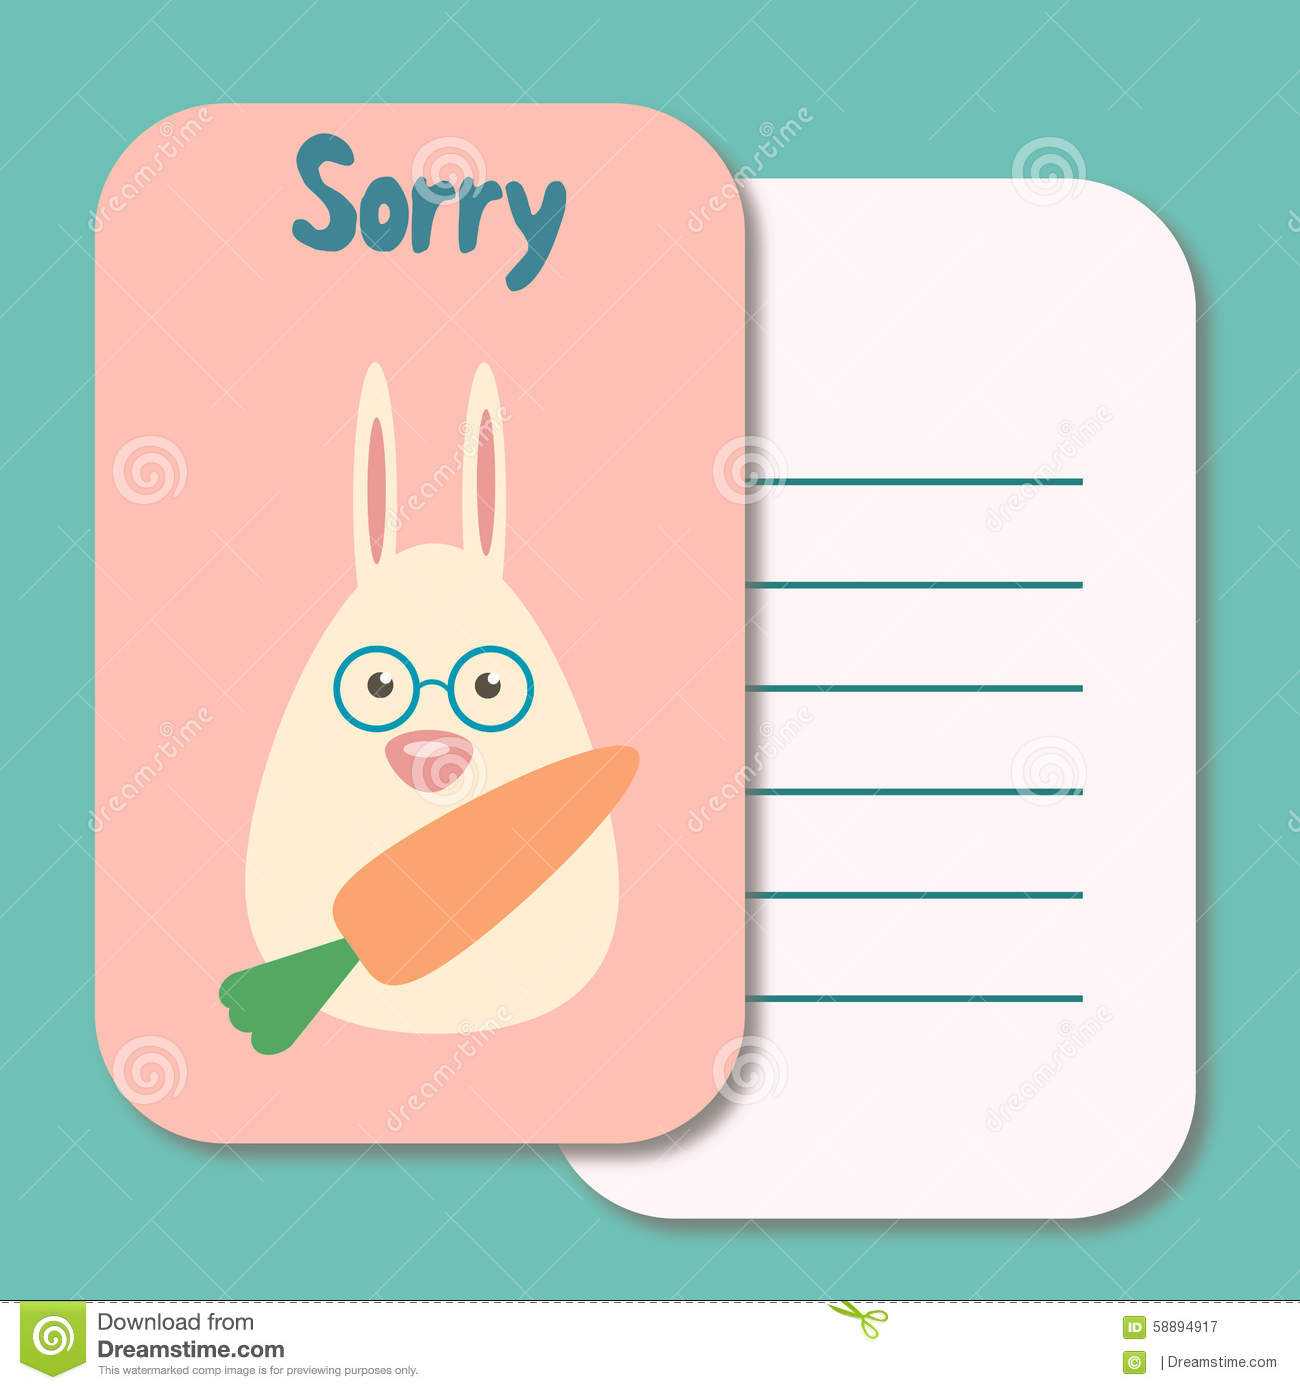 Cute Sorry Card Stock Illustration. Illustration Of For Sorry Card Template